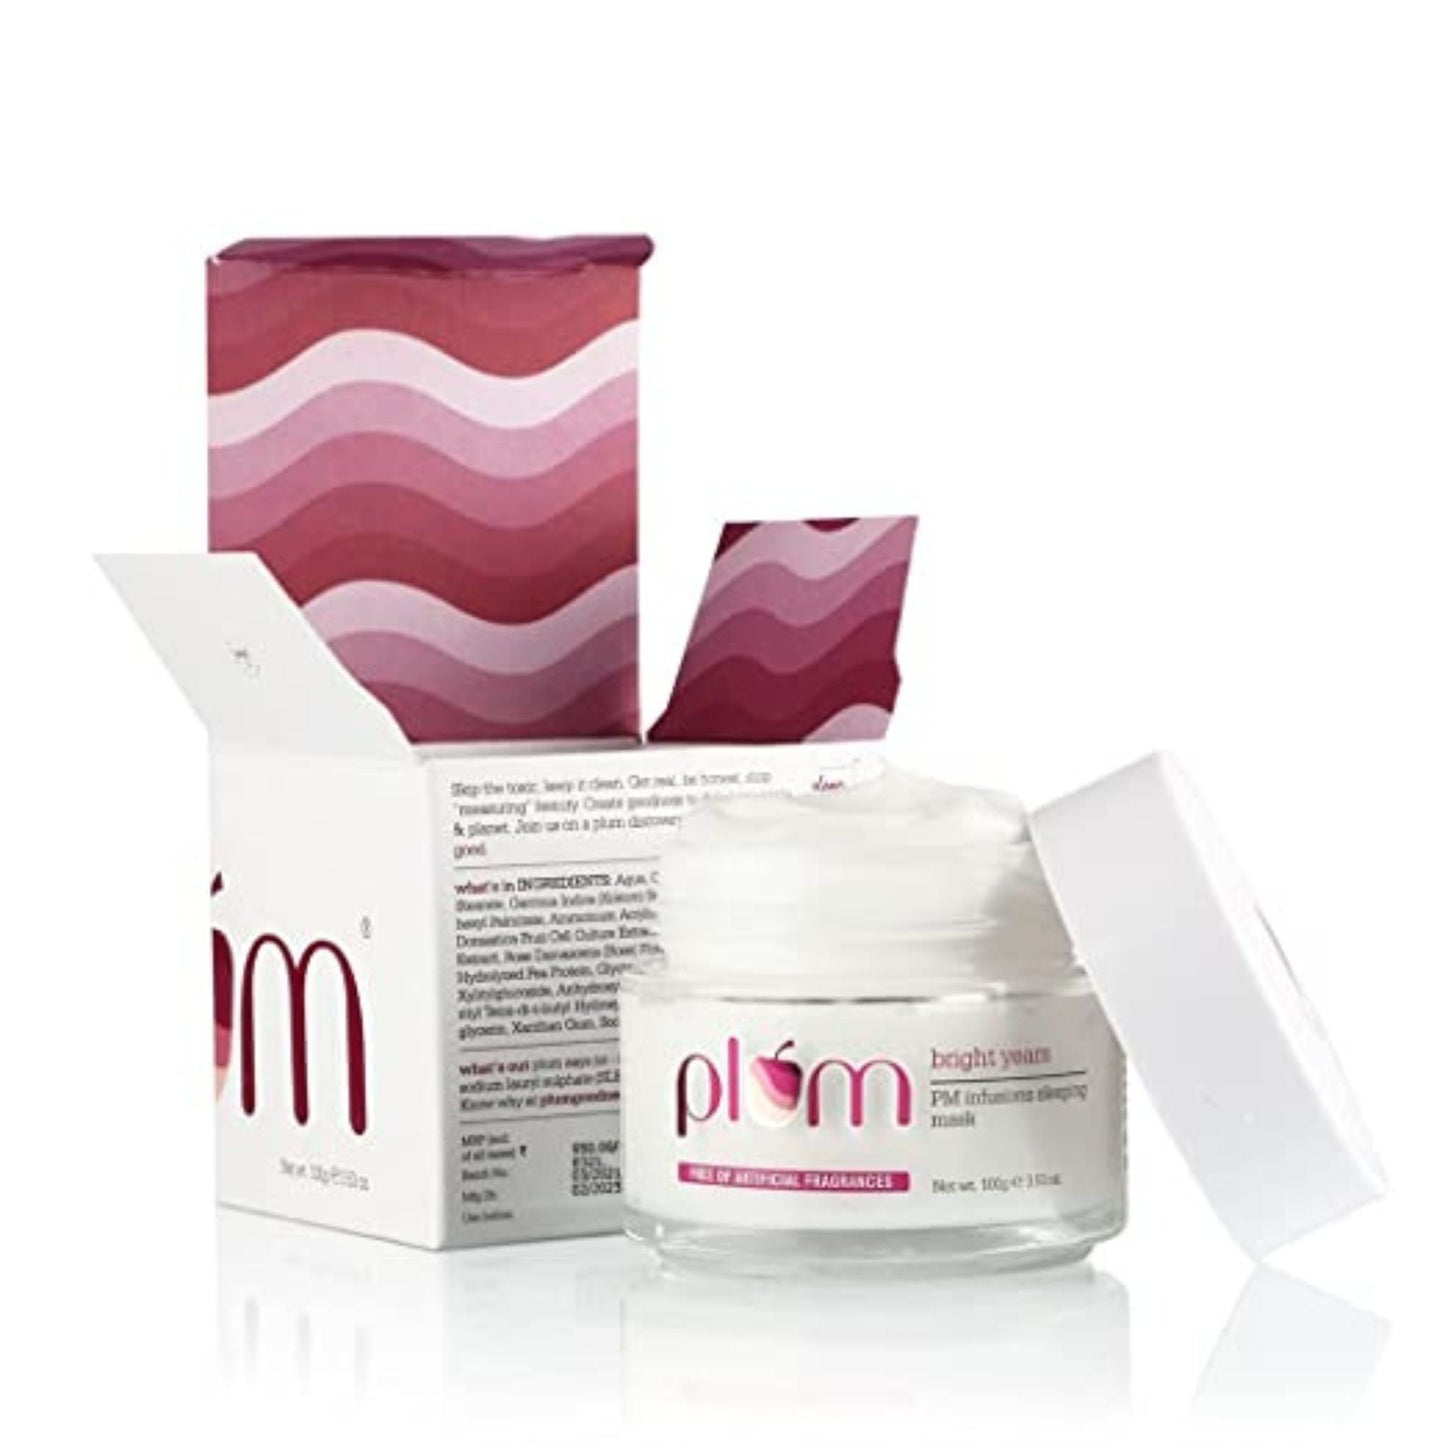 Plum Bright Years PM Infusions Sleeping Face Mask | Rich in Plant Stem Cell Extracts | Infused with Kokum Butter | Overnight mask | Skin Firming | All Skin Types | 100g